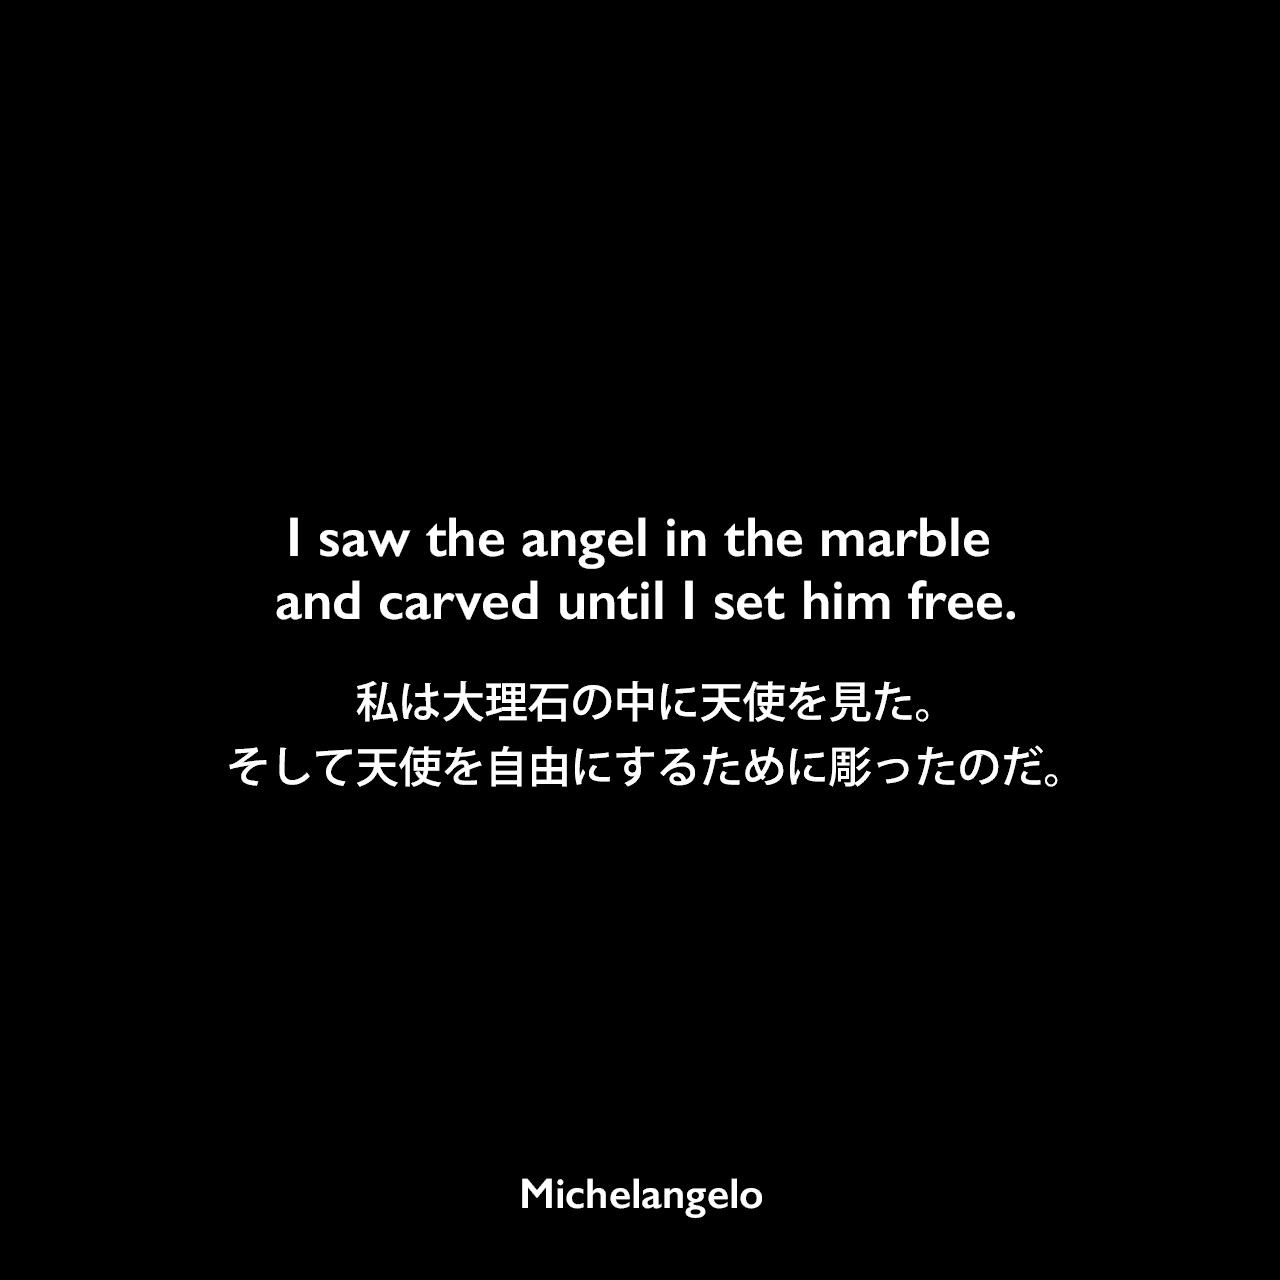 I saw the angel in the marble and carved until I set him free.私は大理石の中に天使を見た。そして天使を自由にするために彫ったのだ。Michelangelo